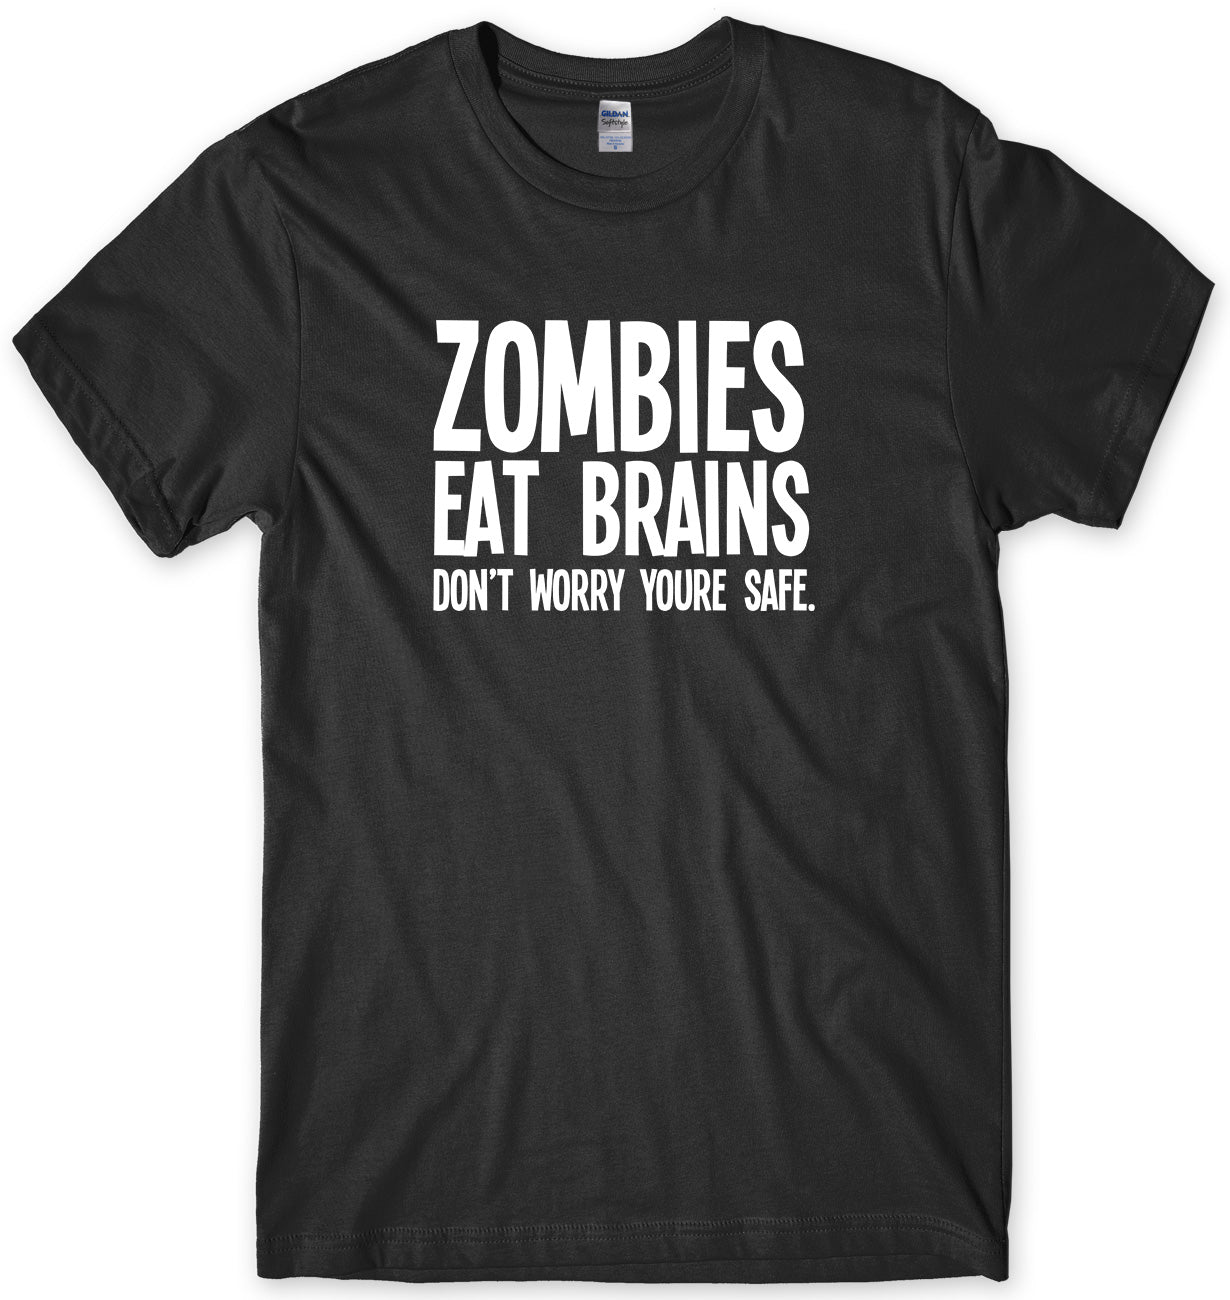 ZOMBIES EAT BRAINS DON'T WORRY YOU'RE SAFE MENS FUNNY UNISEX T-SHIRT